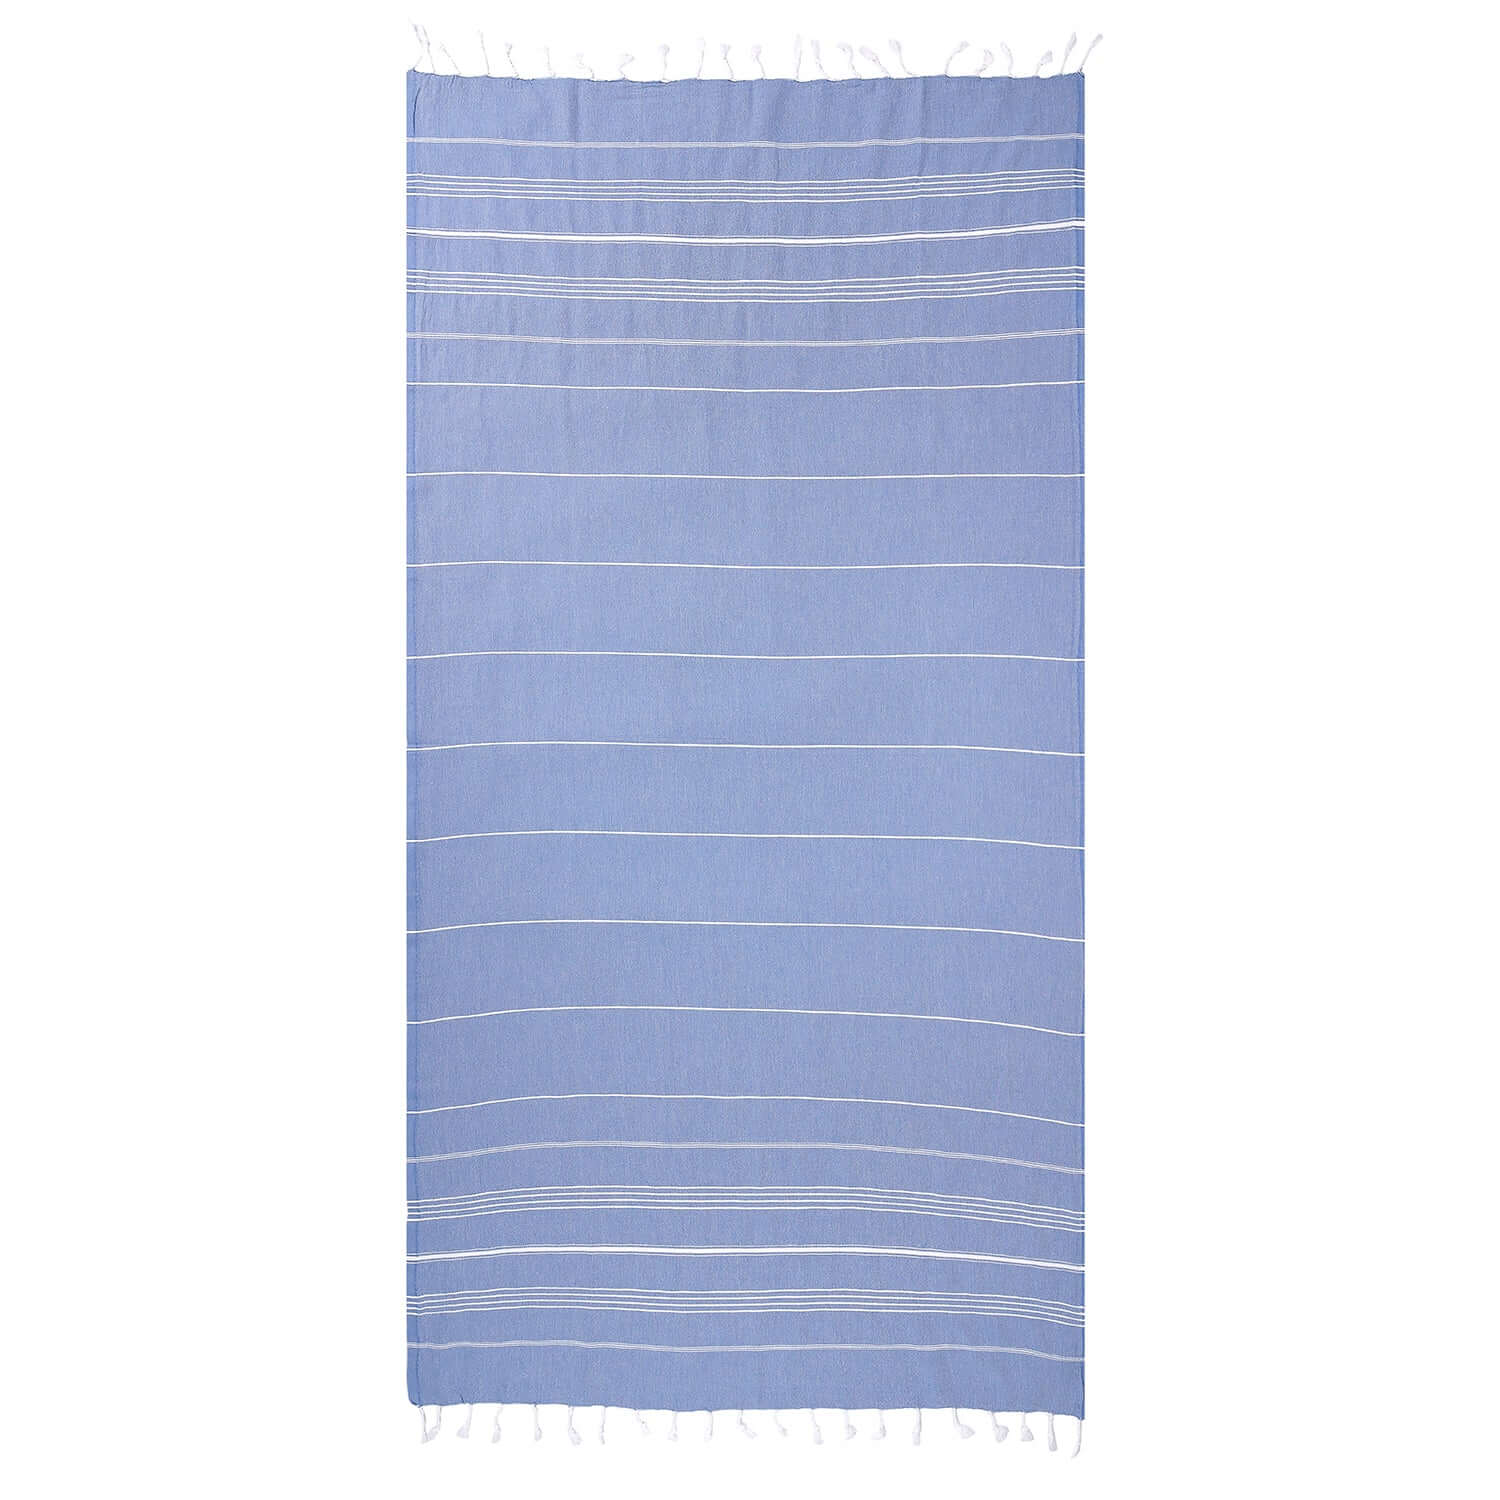 Loom Legacy dark blue beach towel with subtle horizontal stripes and white tassels along the top and bottom edges, displayed against a white background.